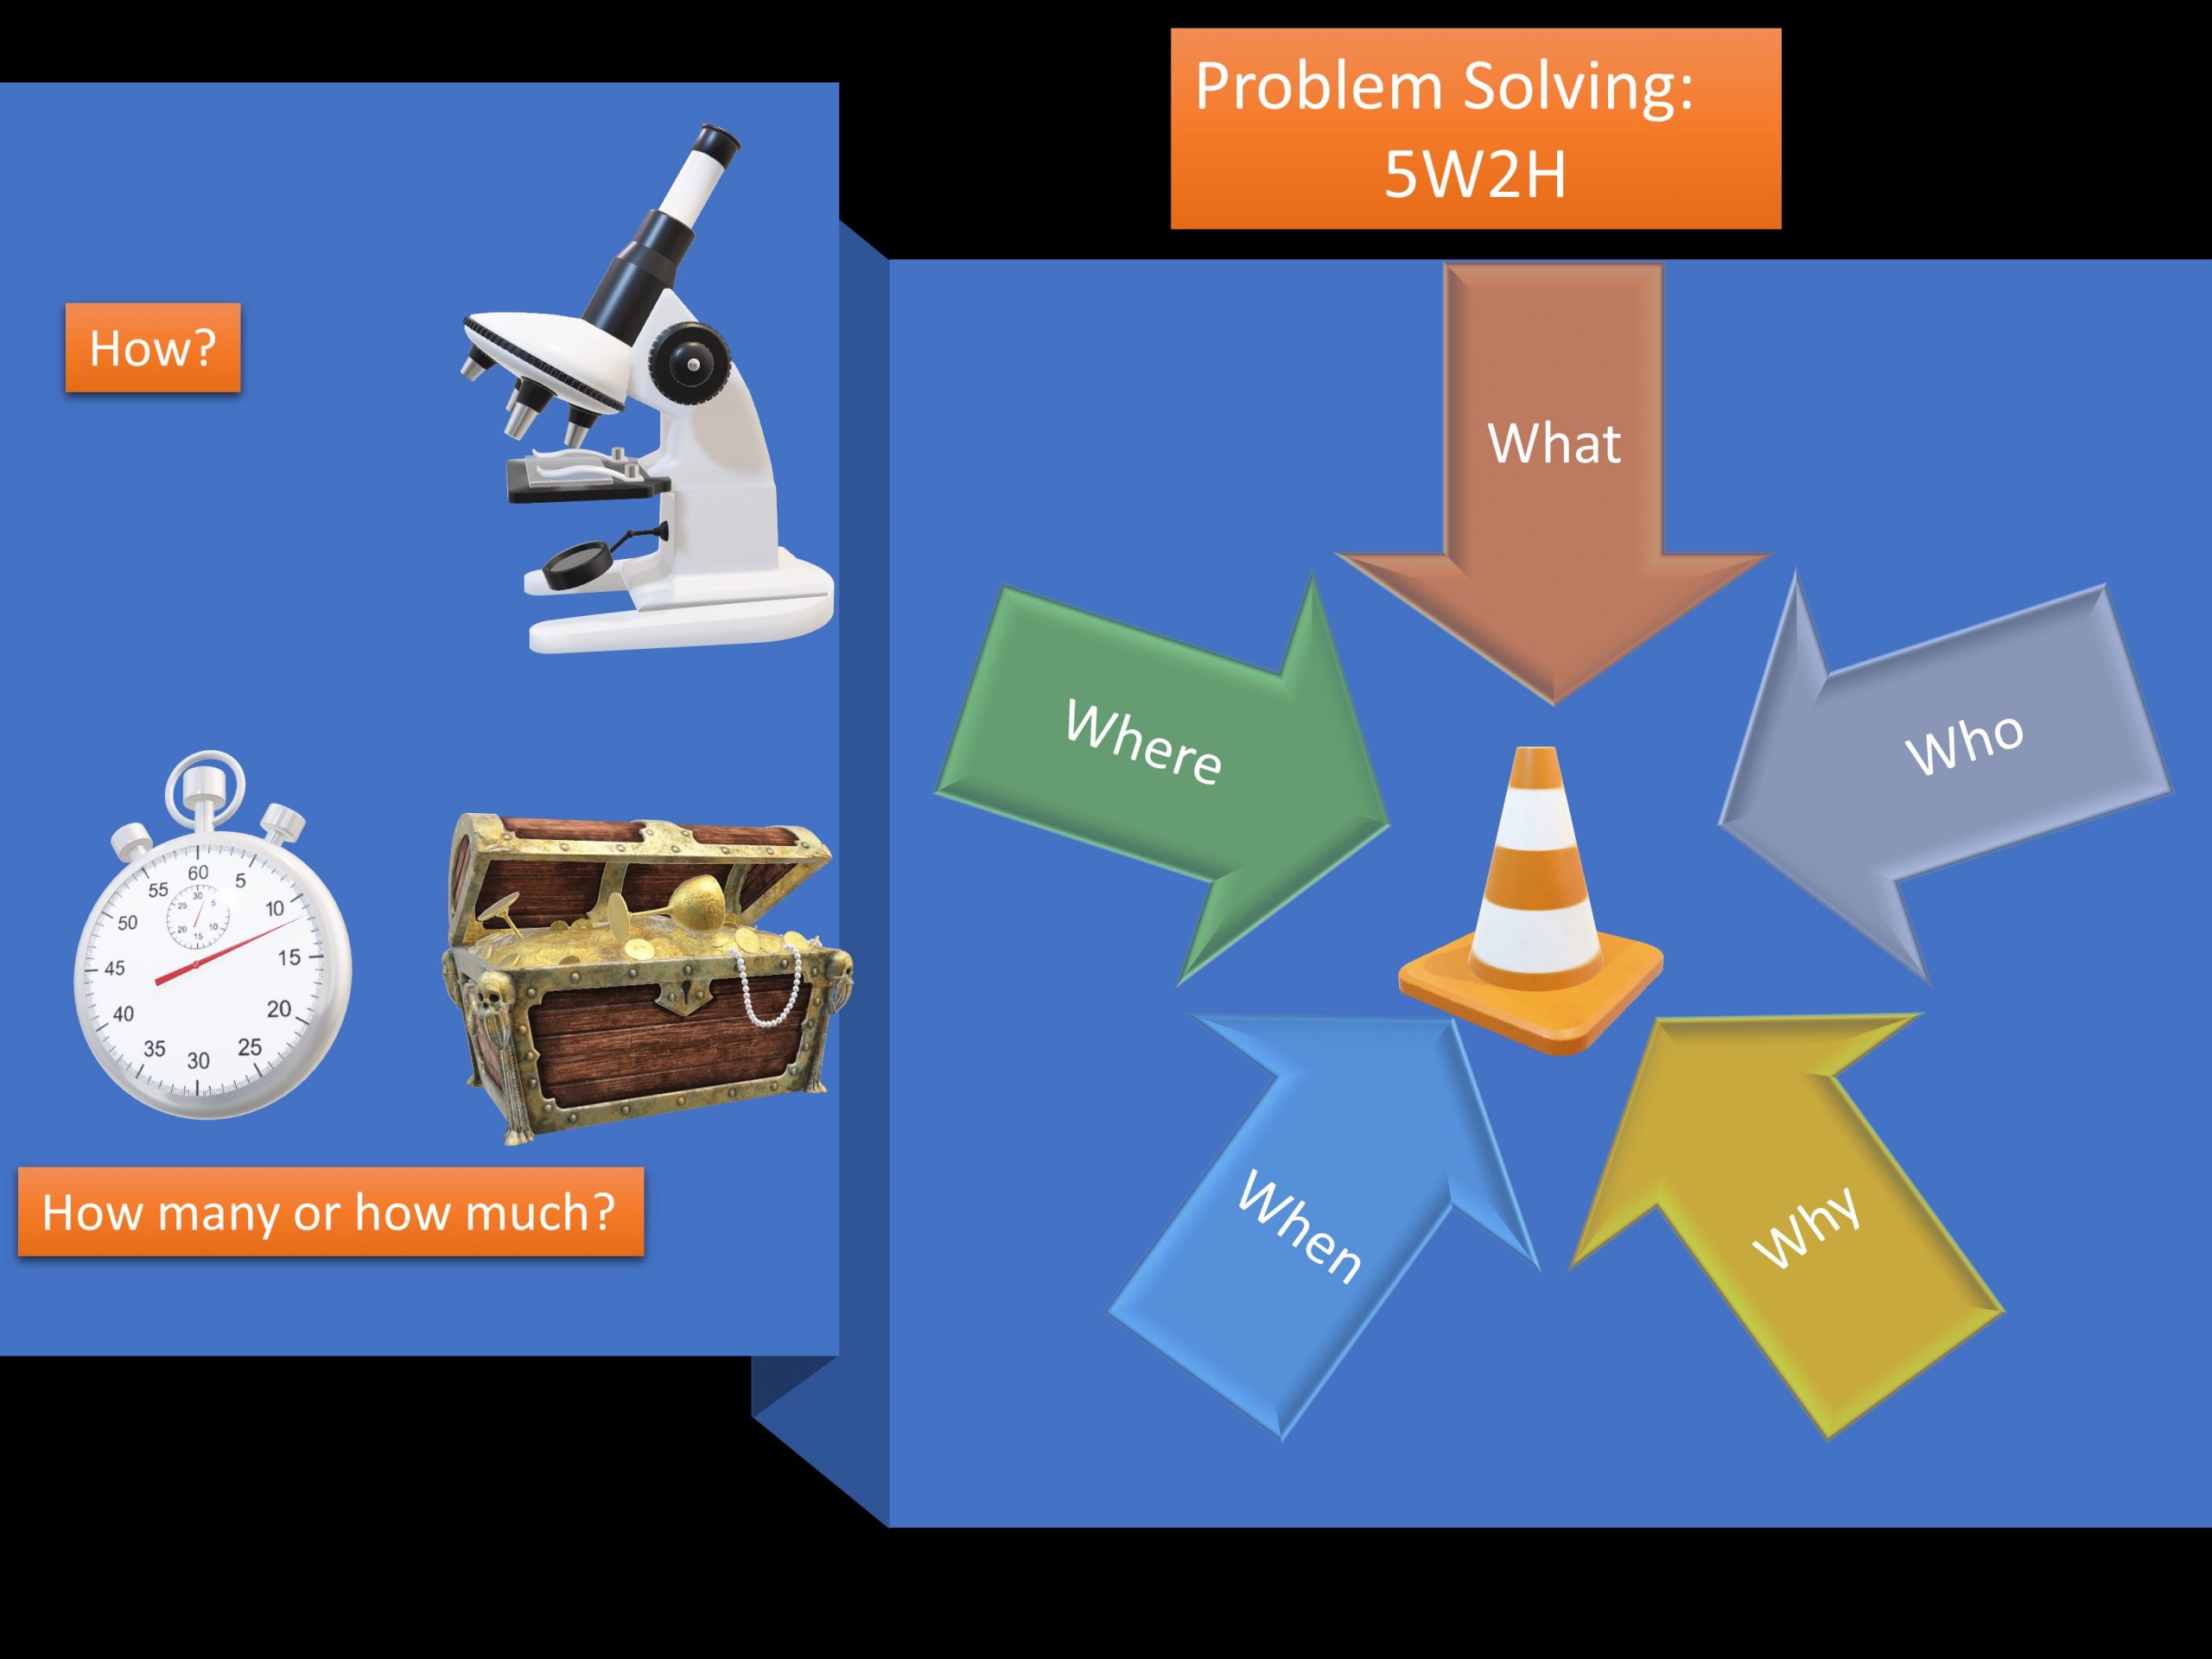 the 5w2h approach involves problem solving based on